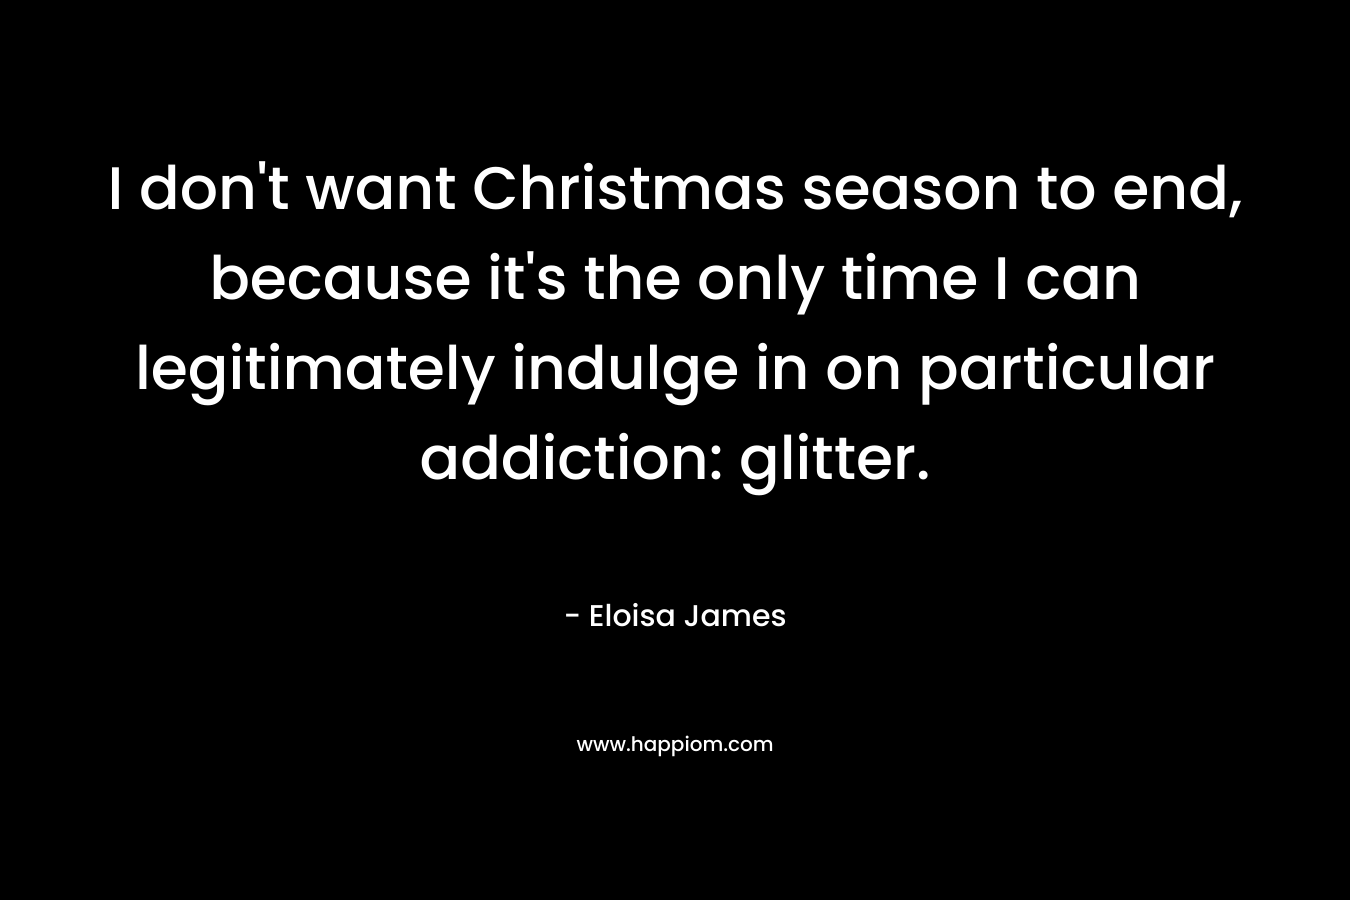 I don't want Christmas season to end, because it's the only time I can legitimately indulge in on particular addiction: glitter.